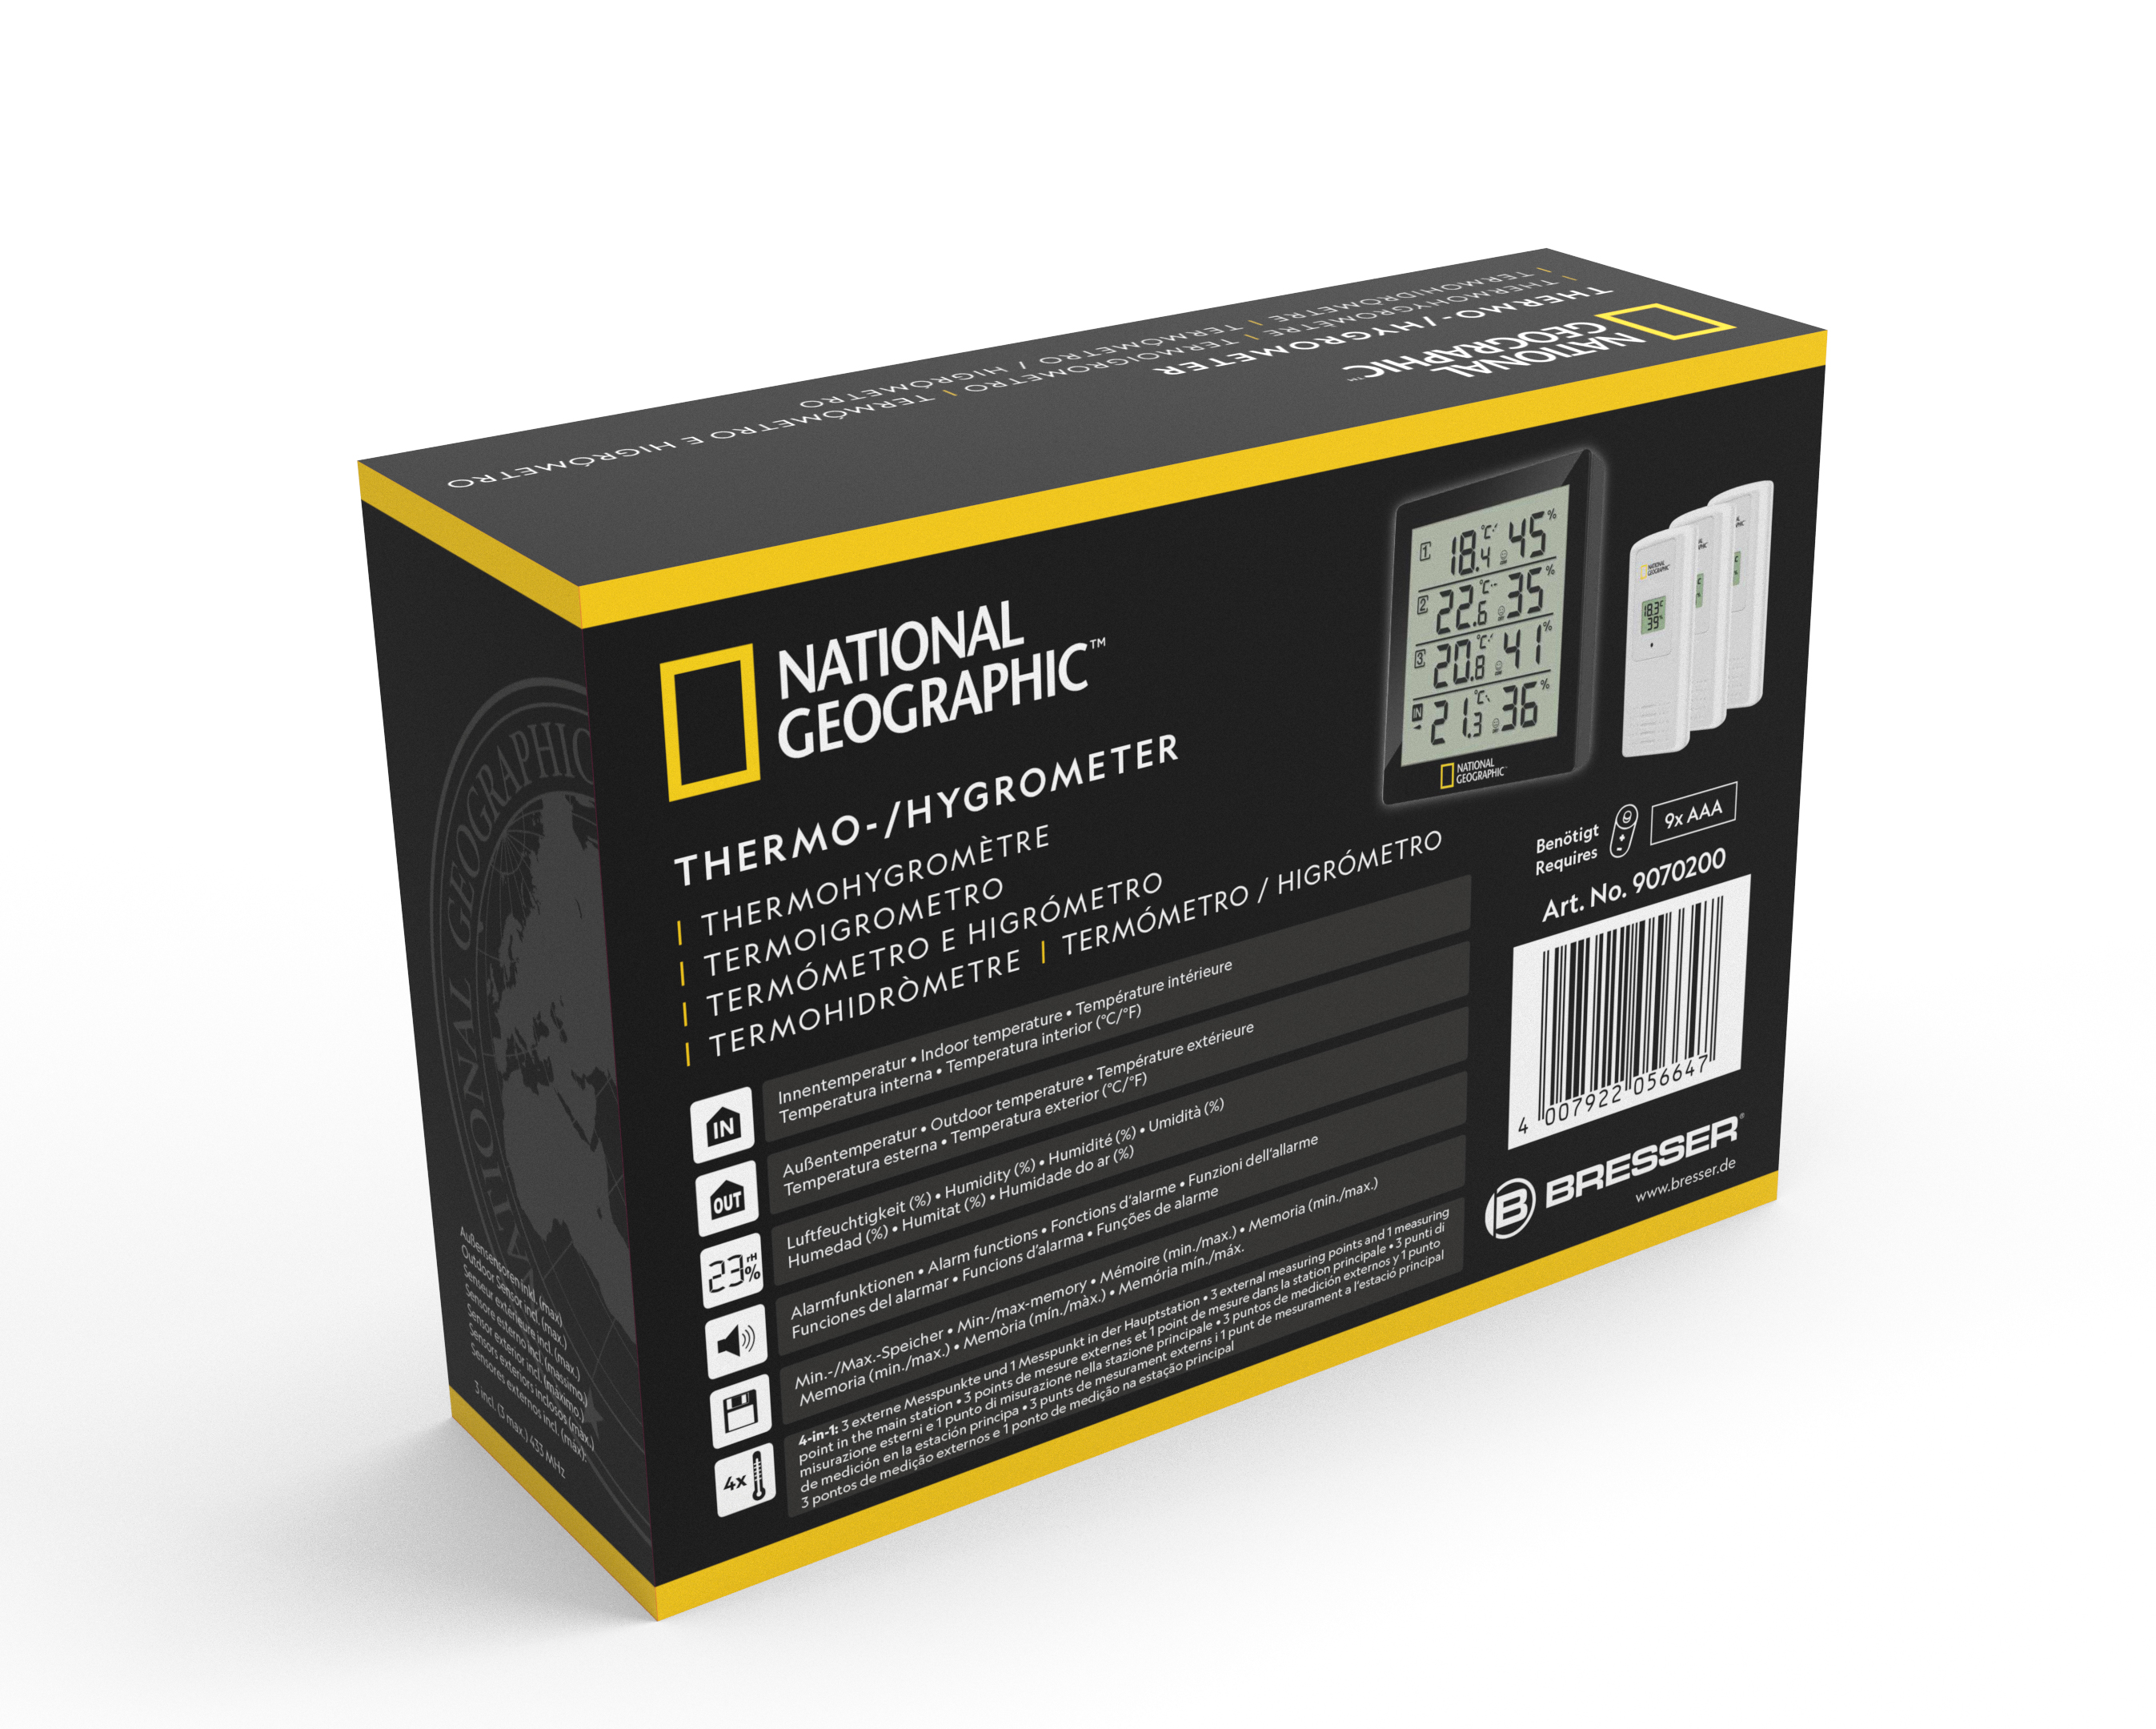 NATIONAL GEOGRAPHIC Thermo-Hygrometer 4 Measurement Results, black